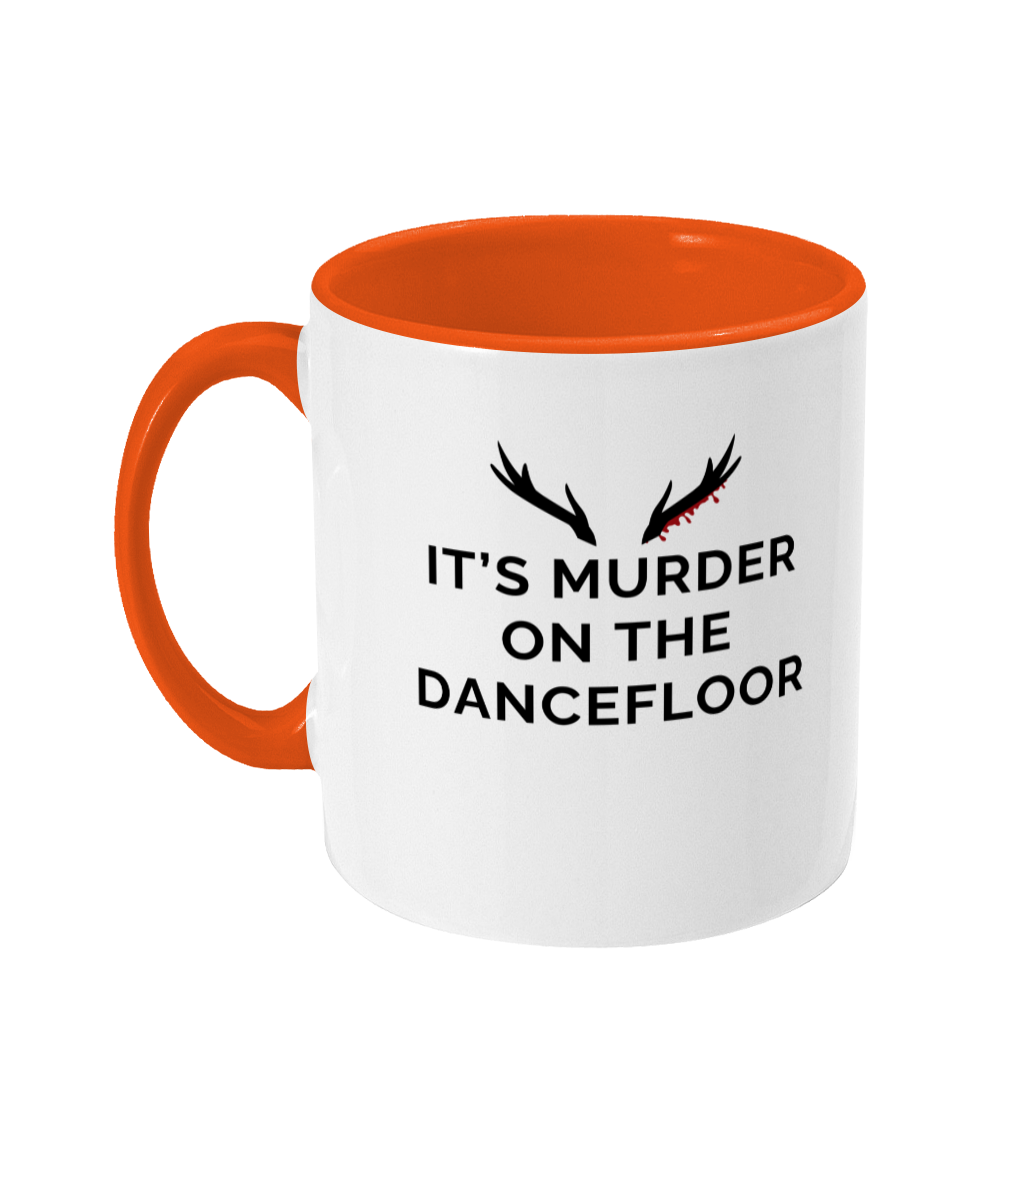 Mug with a orange handle and orange inner that reads "It's Murder On The Dancefloor" with antlers above the text with blood drips coming from the right bottom antler